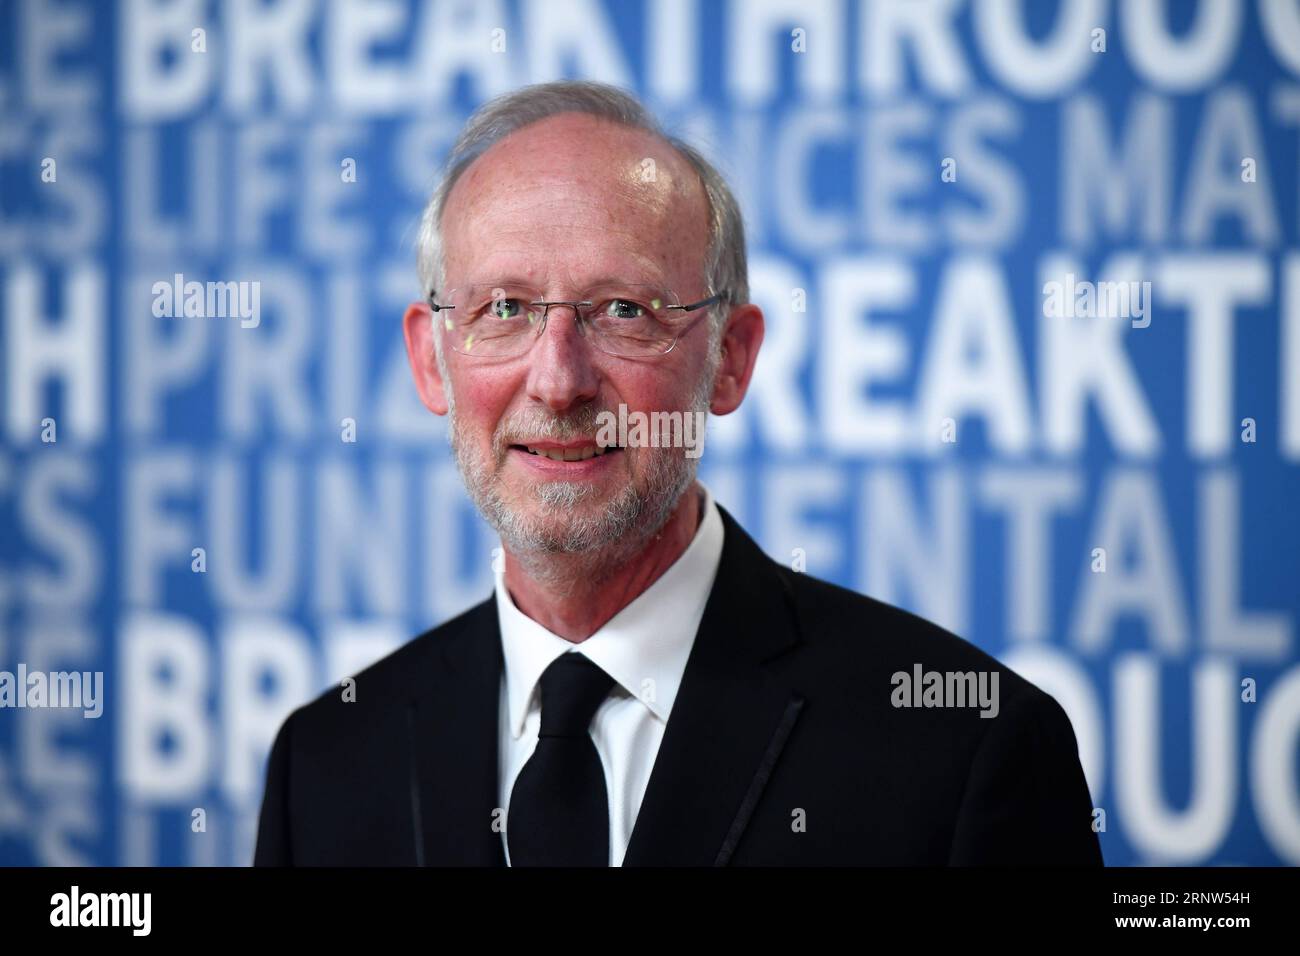 (171204) -- SAN FRANCISCO, Dec. 4, 2017 -- Don W. Cleveland from the Ludwig Institute for Cancer Research at the University of California, San Diego attends the awarding ceremony of the 2018 Breakthrough Prize in San Francisco, the United States, on Dec. 3, 2017. The Breakthrough Prize Foundation on Sunday announced here the winners of the 2018 Breakthrough Prizes in fundamental physics, life sciences and mathematics, together with several other prizes to encourage young scientists. The prize in life sciences went to Joanne Chory from the Salk Institute for Biological Studies and Howard Hughes Stock Photo